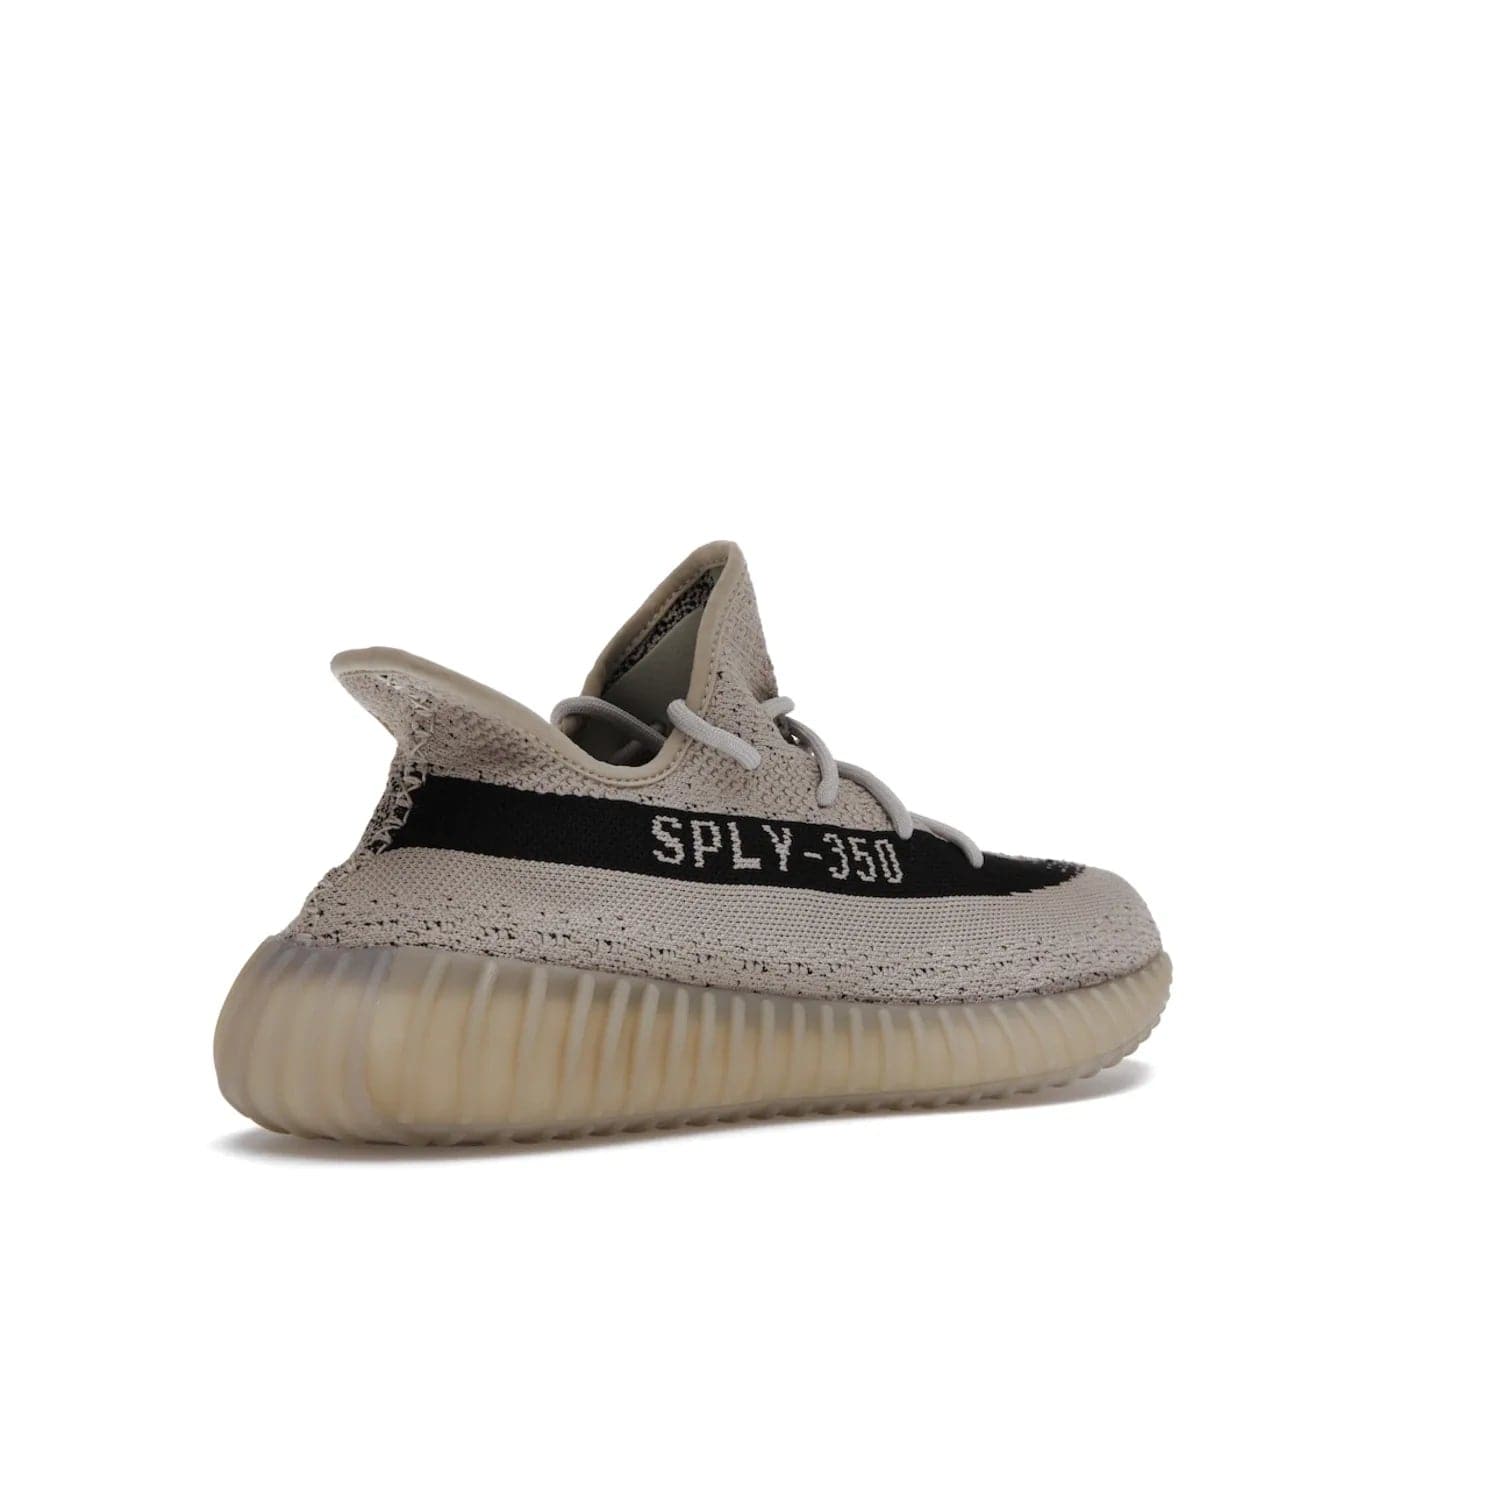 adidas Yeezy Boost 350 V2 Slate - Image 33 - Only at www.BallersClubKickz.com - Adidas Yeezy Boost 350 V2 Slate Core Black Slate featuring Primeknit upper, Boost midsole and semi-translucent TPU cage. Launched on 3/9/2022, retailed at $230.